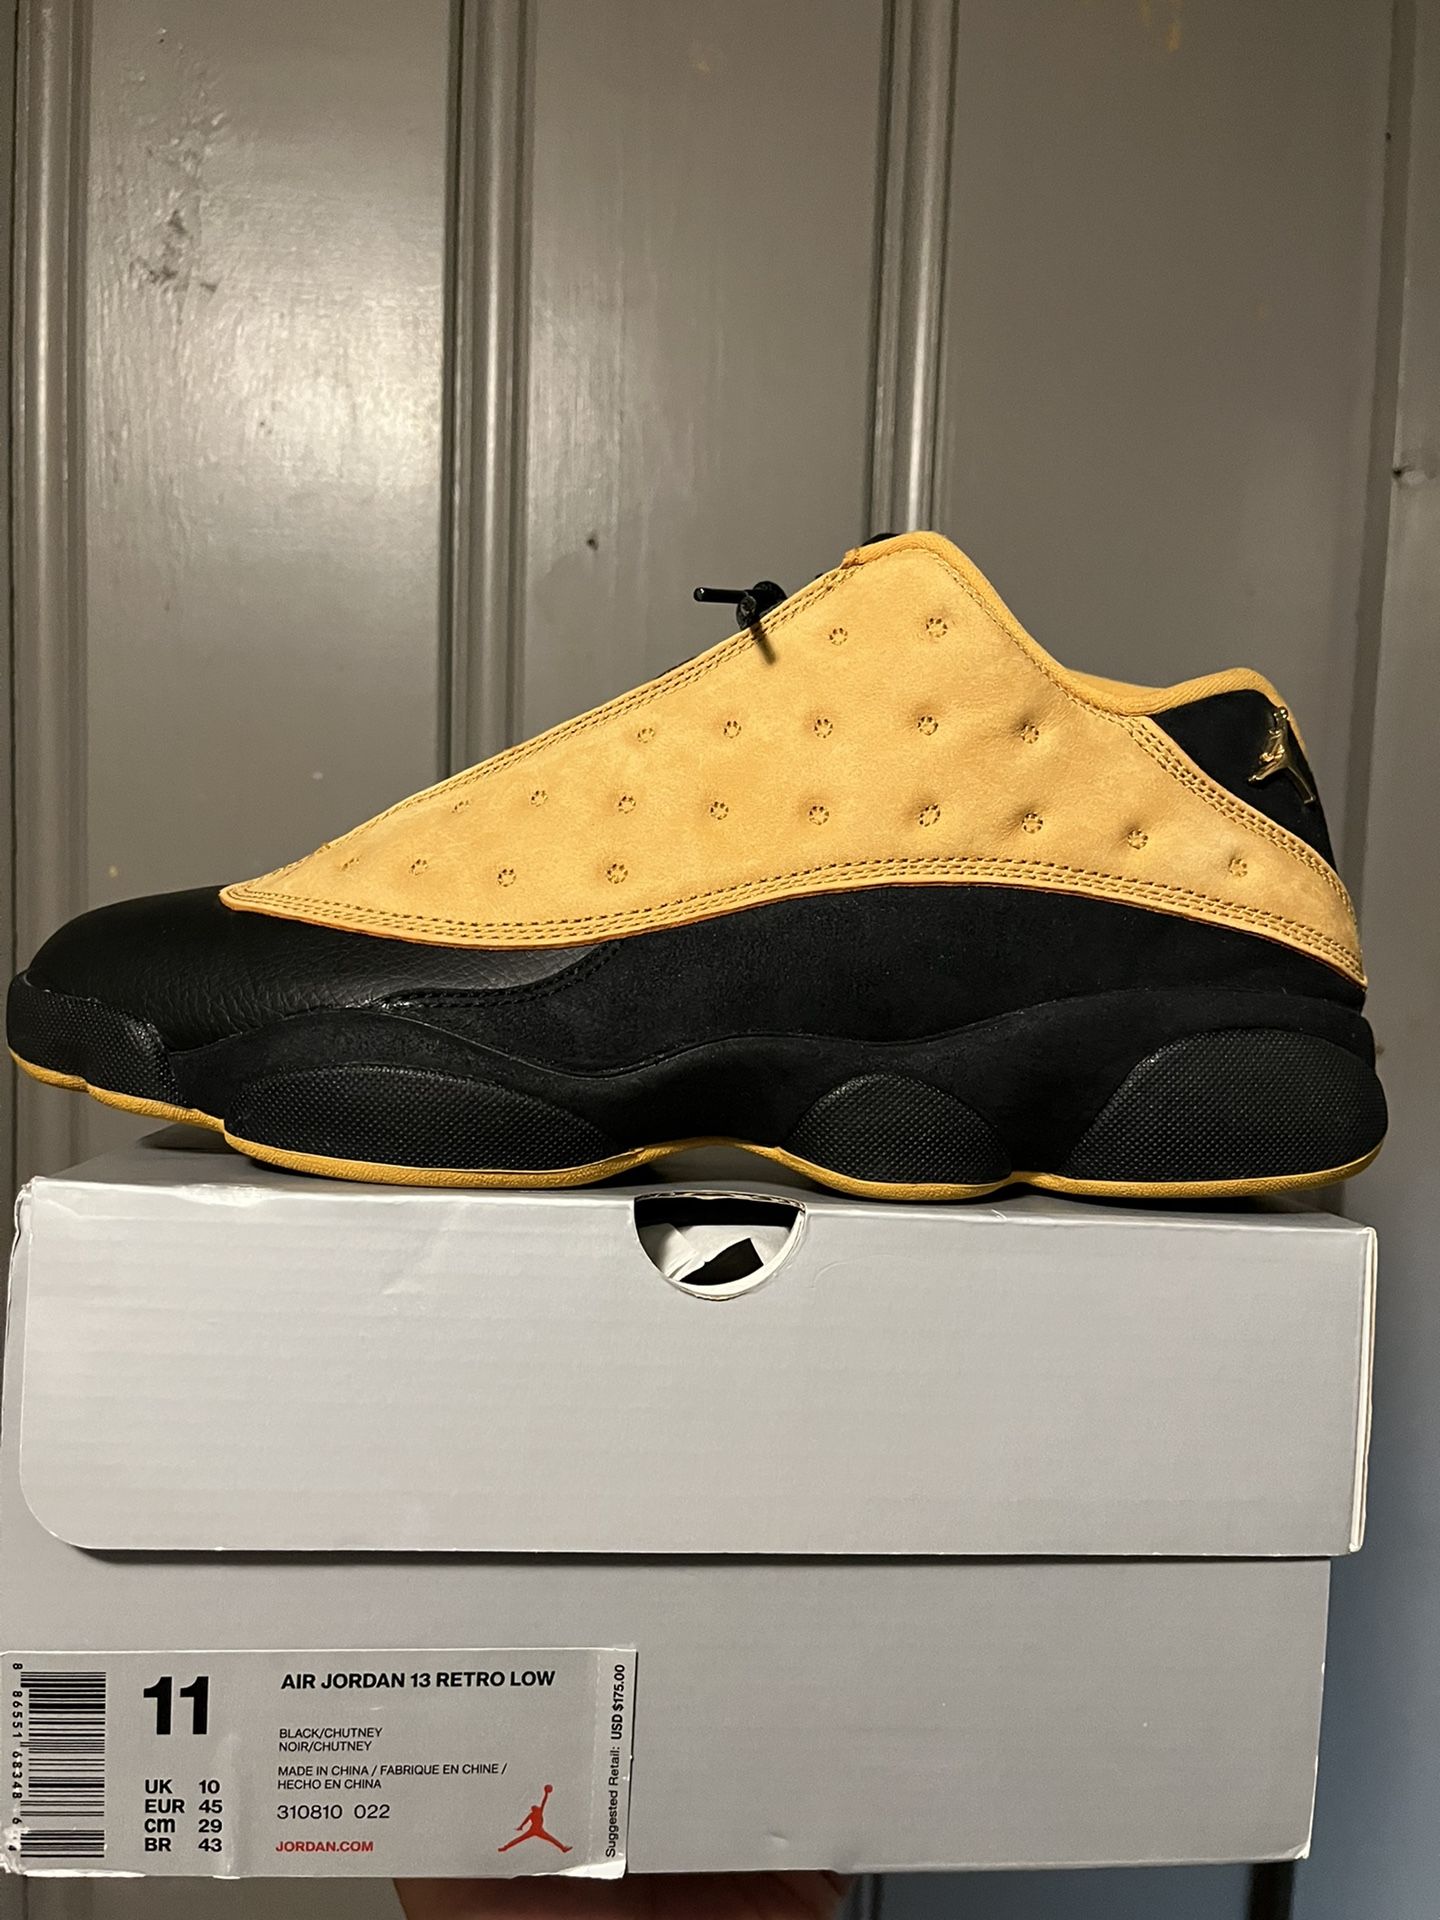 Jordan 13 low retro “Chutney” size (11). In Mens. Worn in excellent condition. Comes with Og all. $110. Cash. No Trades. 